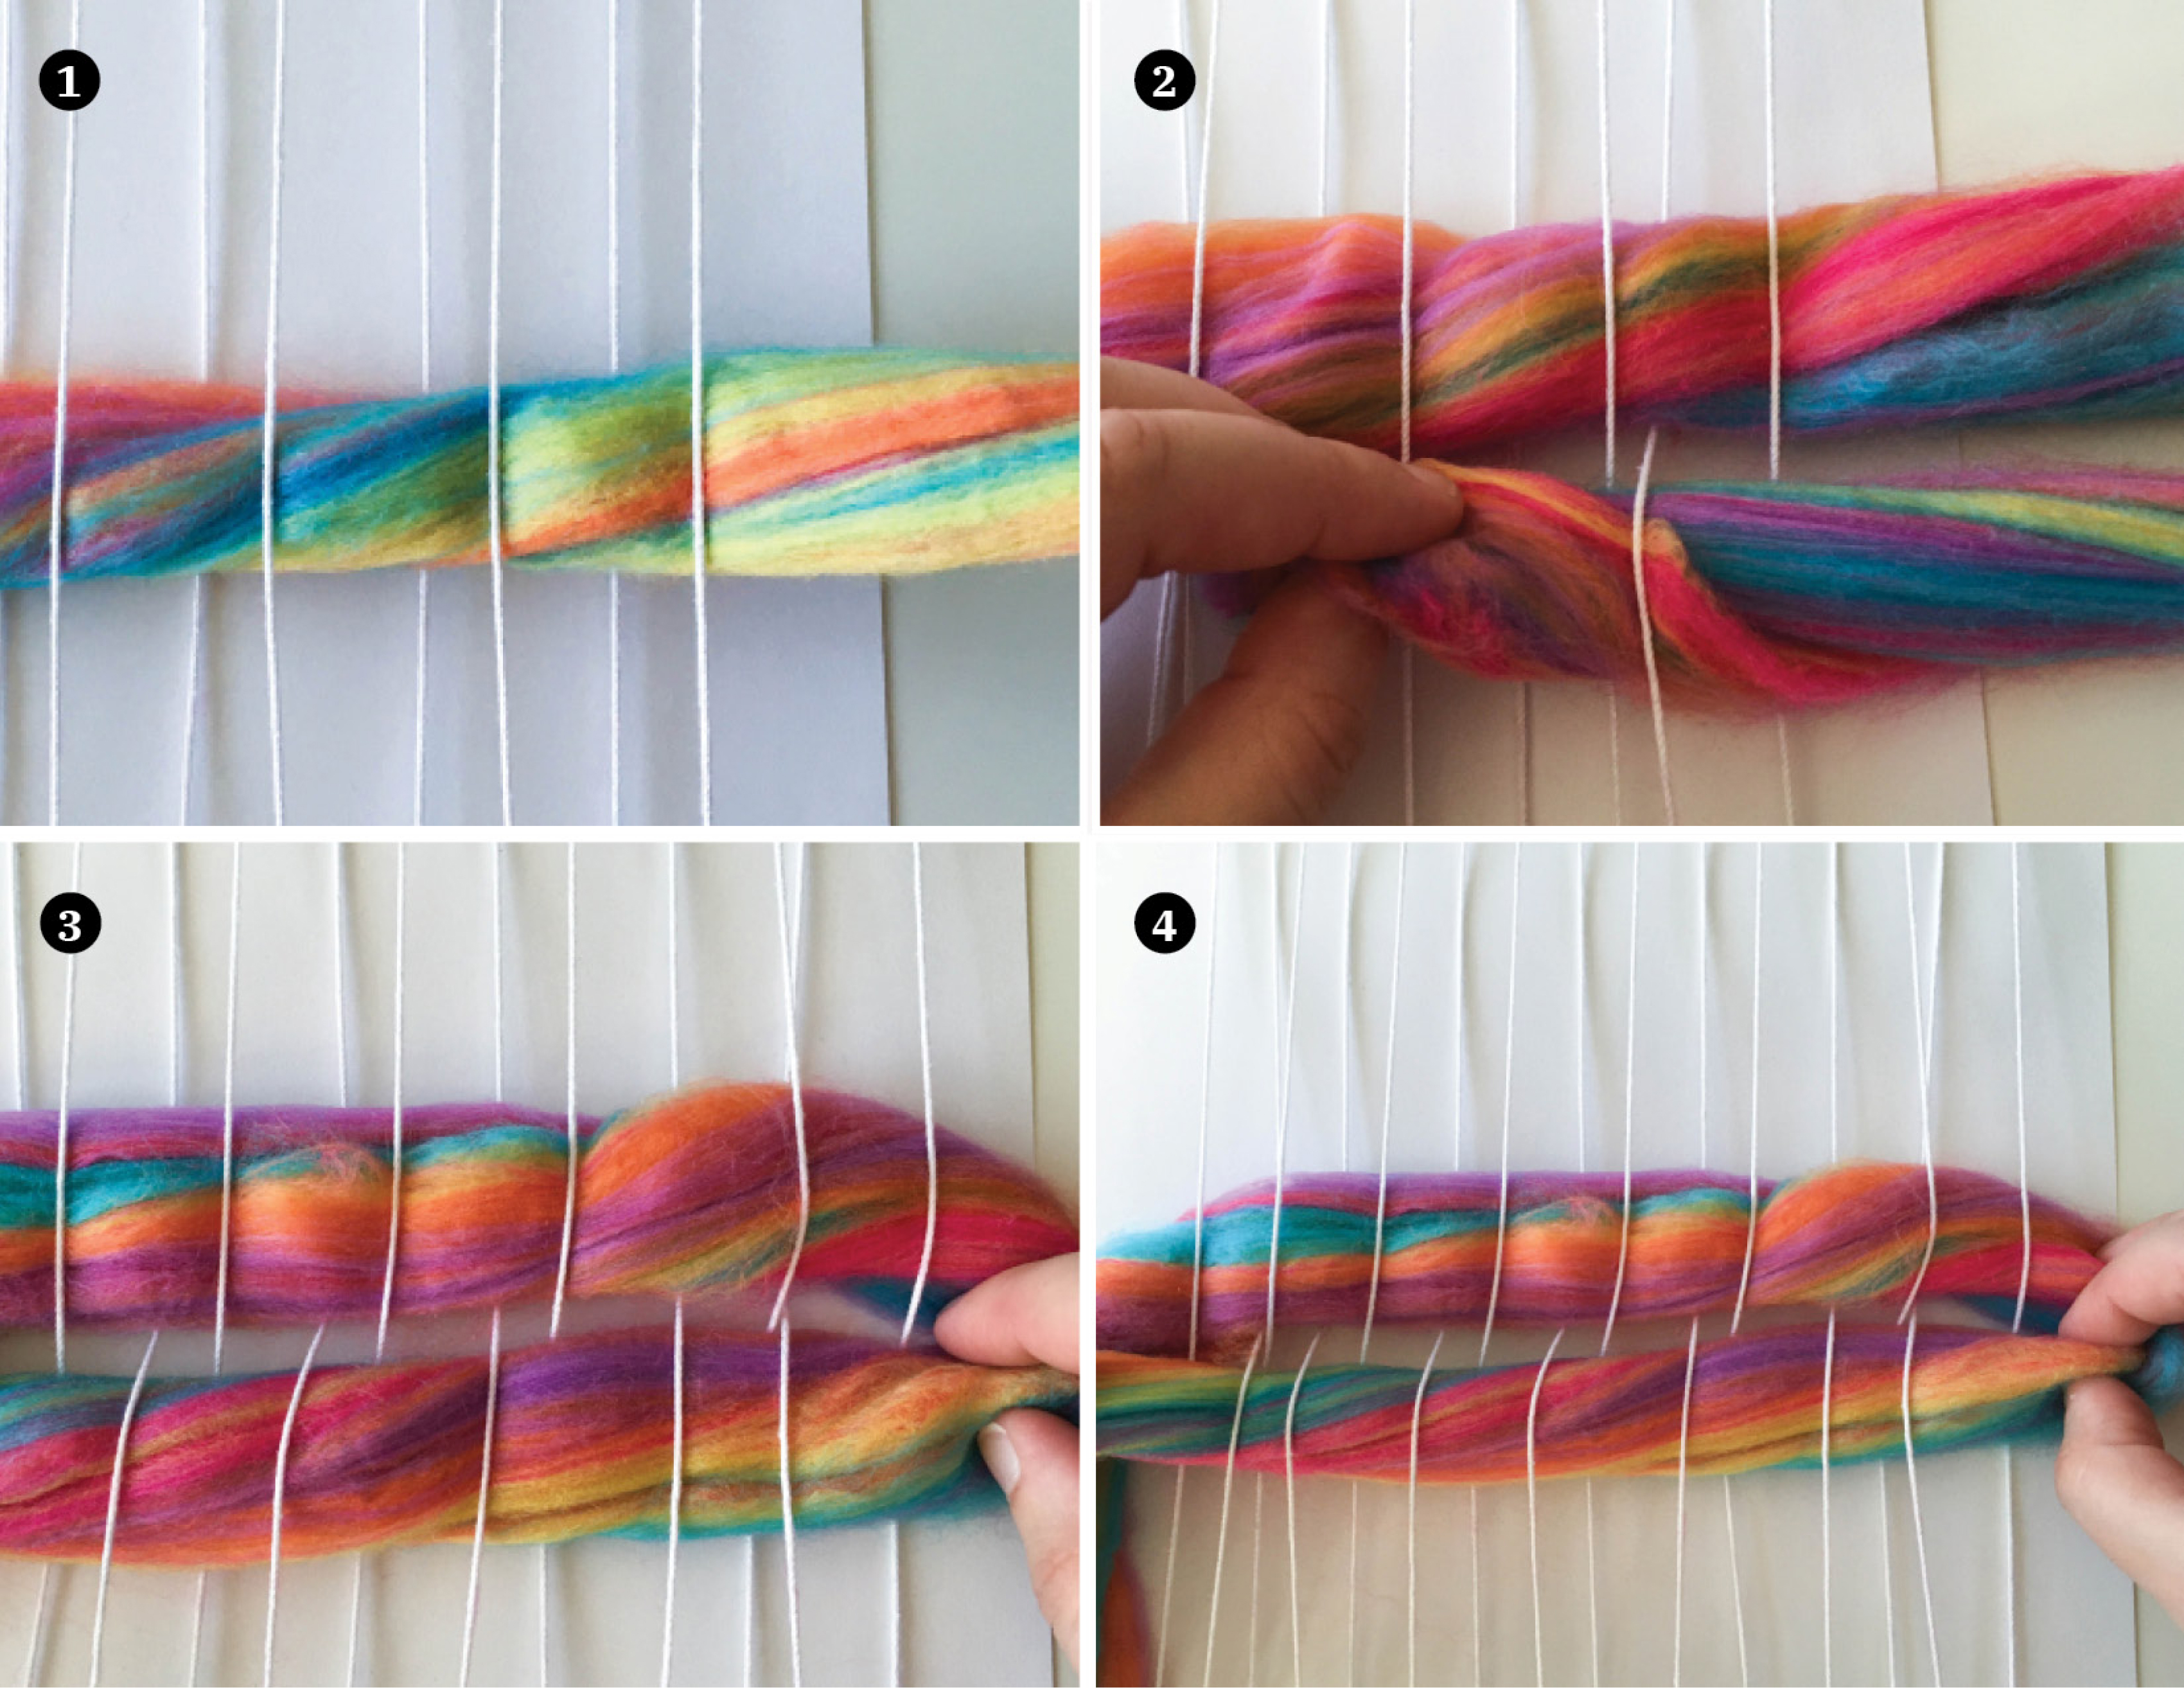 Composite of four images showing various stages of weaving.